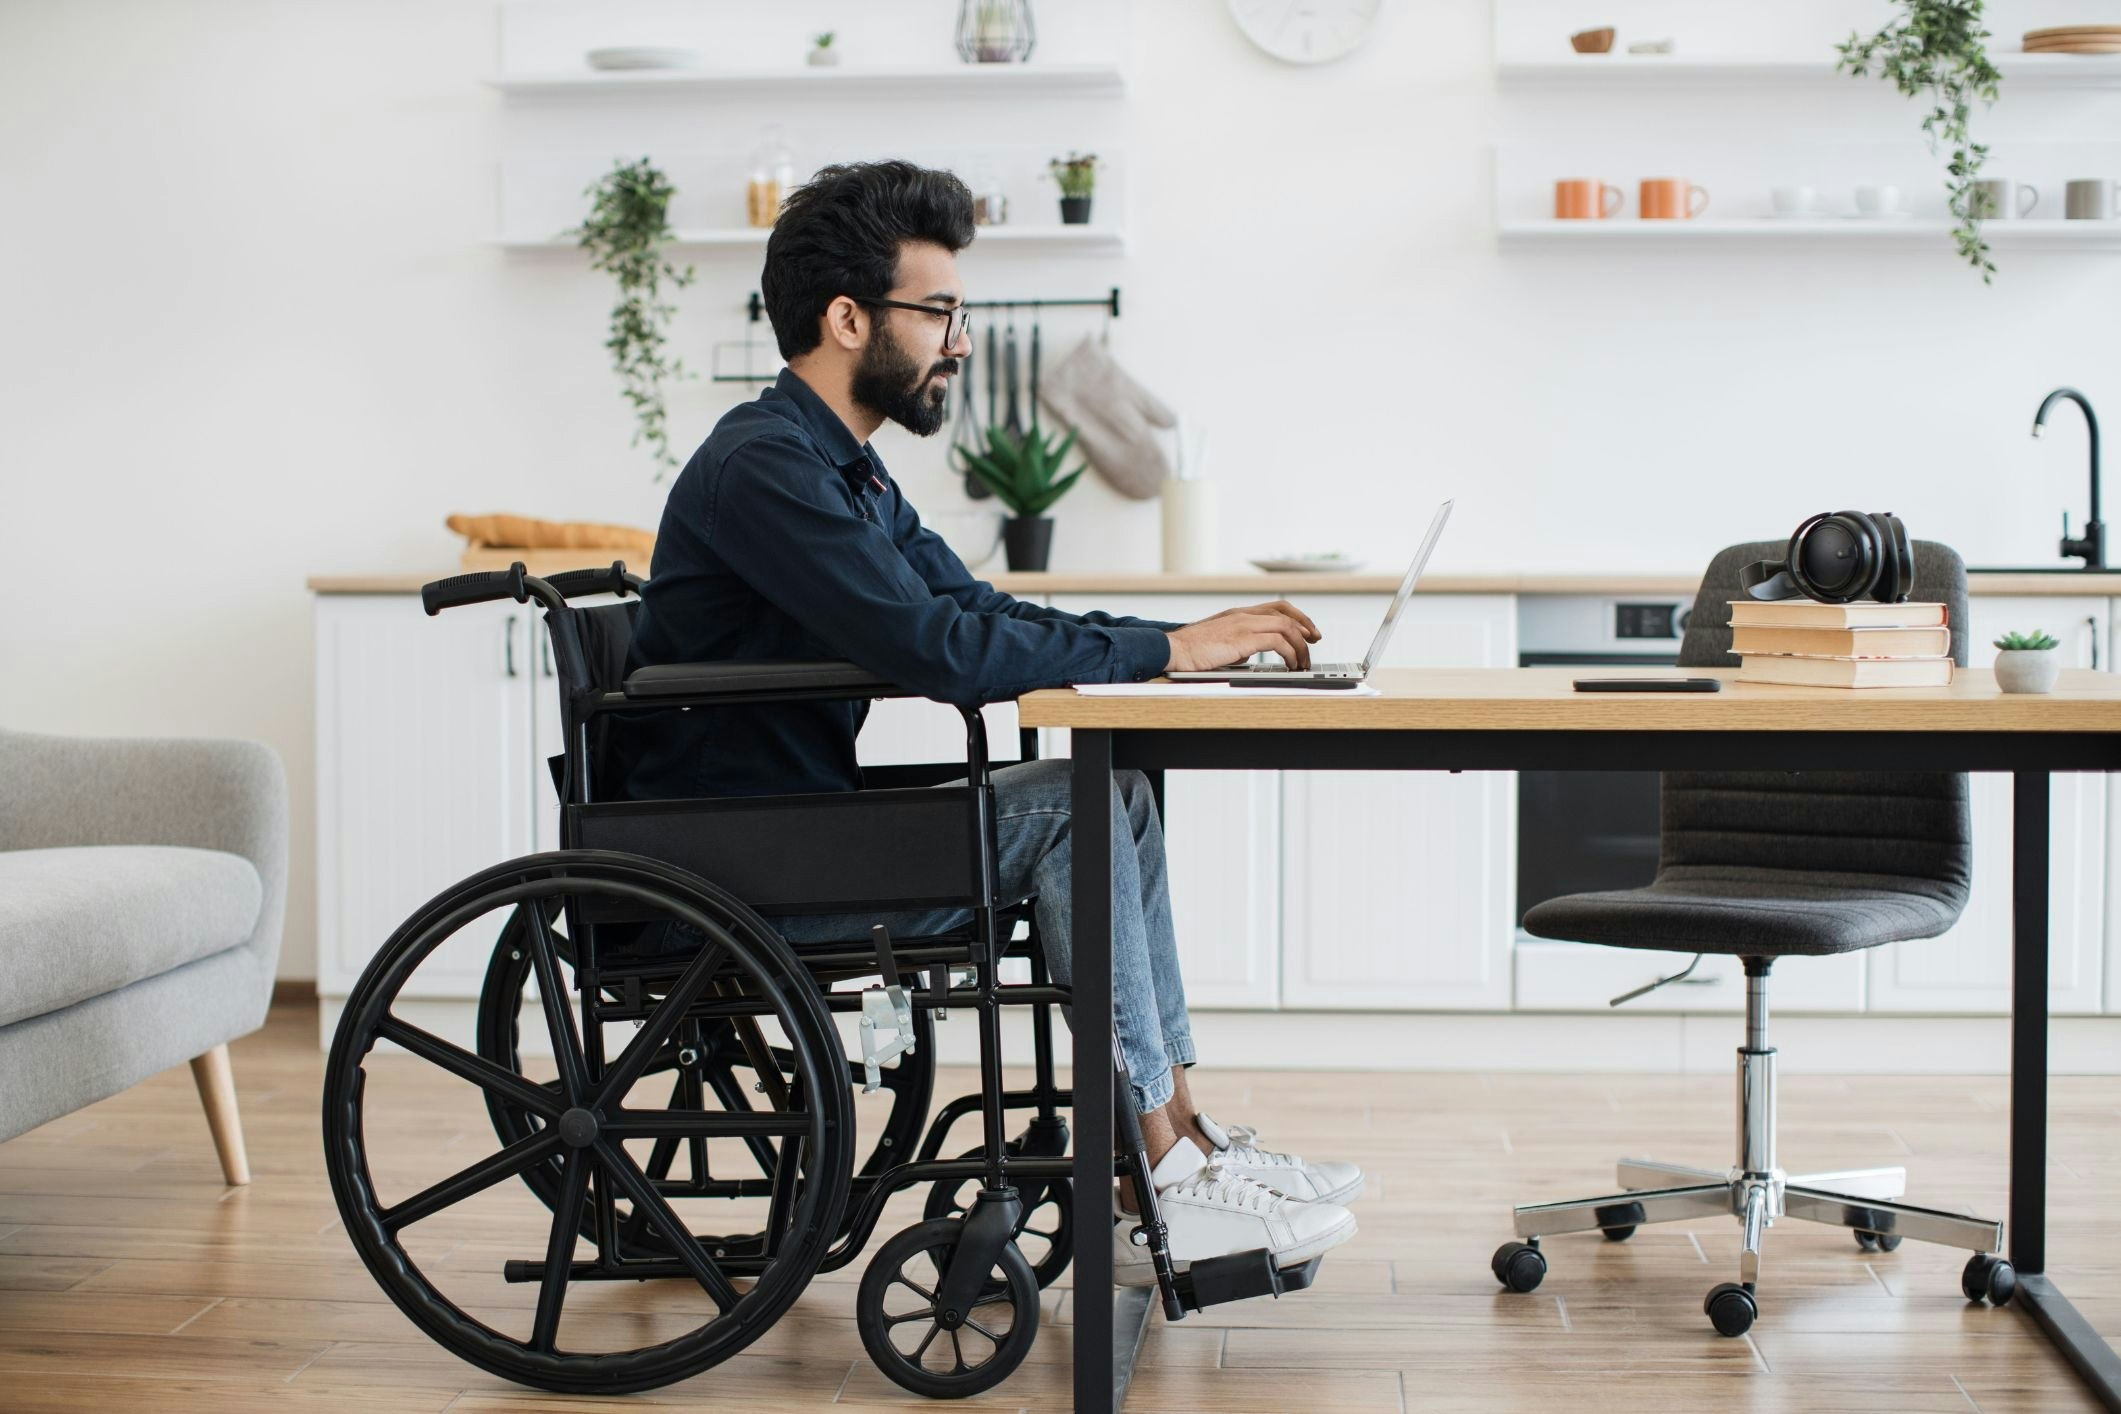 <p>Some NDIS participants have been able to access funding for sex work since 2020, but this may soon change. [Source: Shutterstock]</p>
